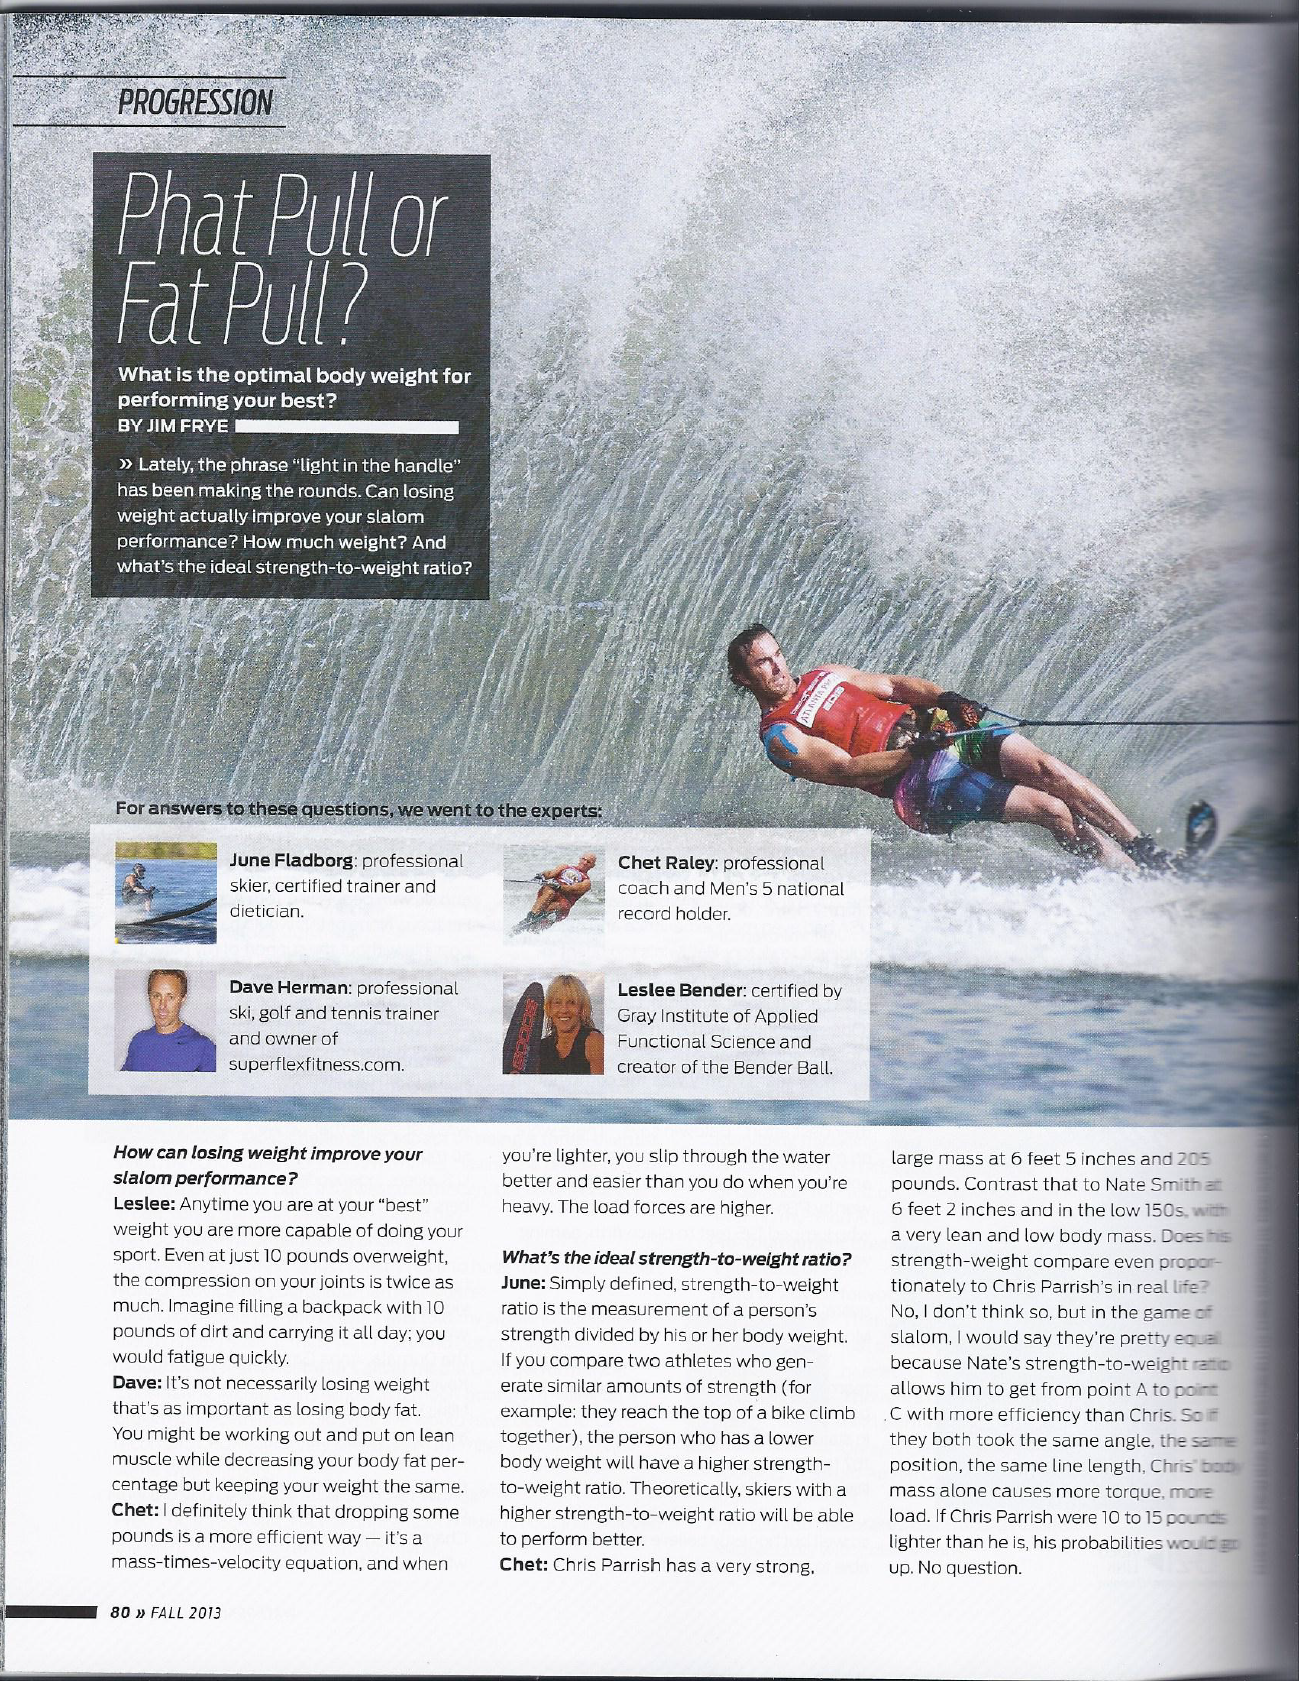 'Phat Pull or Fat Pull?' by WaterSki Magazine